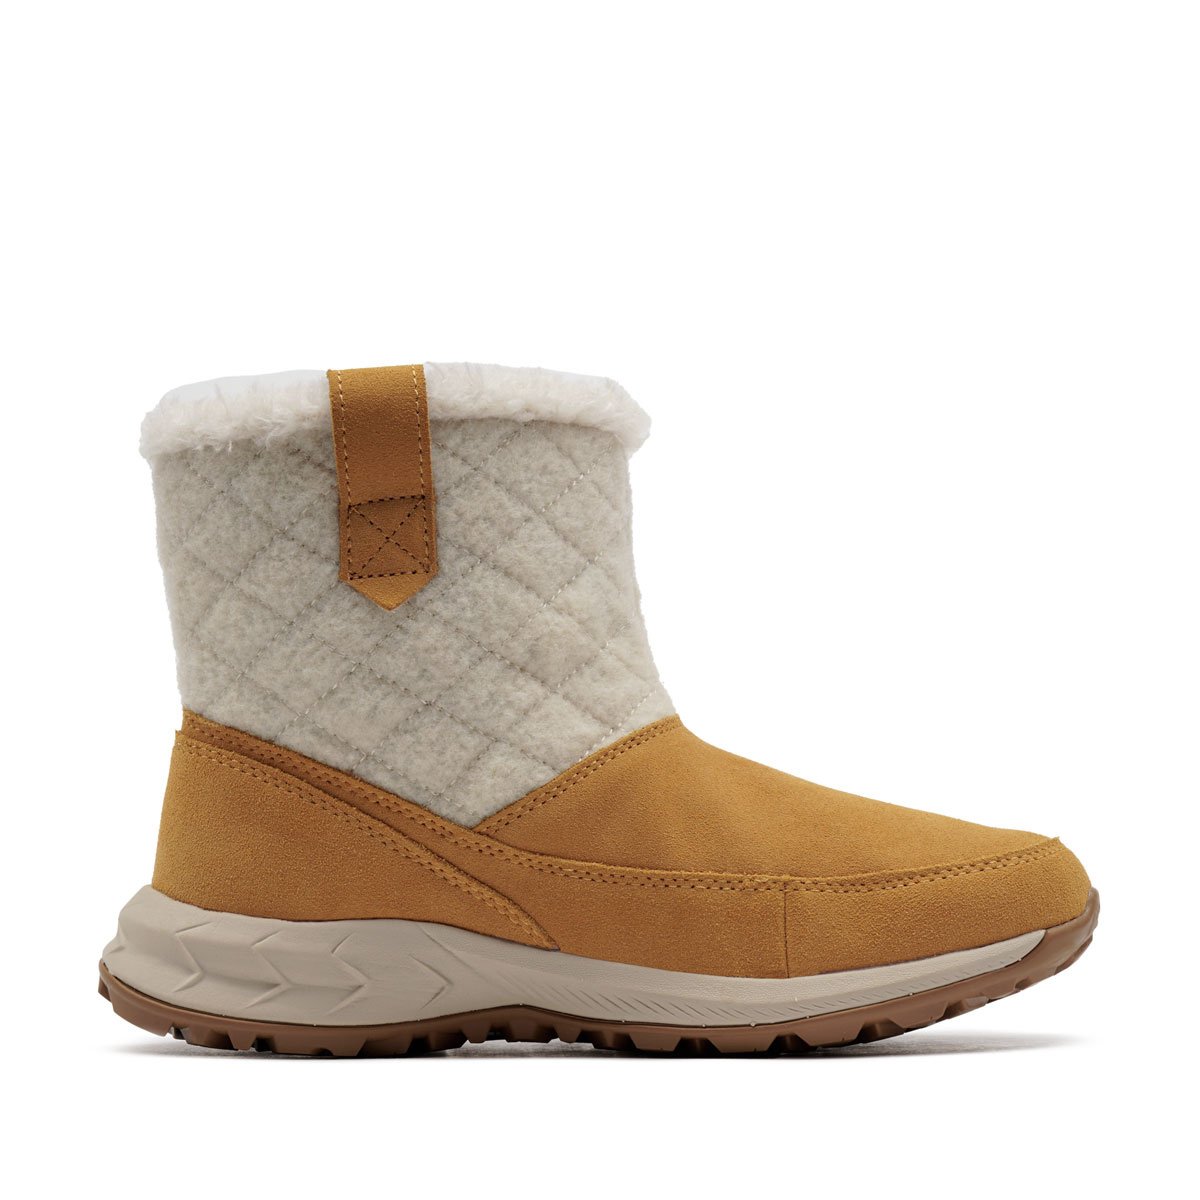 Jack Wolfskin Queenstown Texapore Boot Дамски зимни обувки 4053551-5501